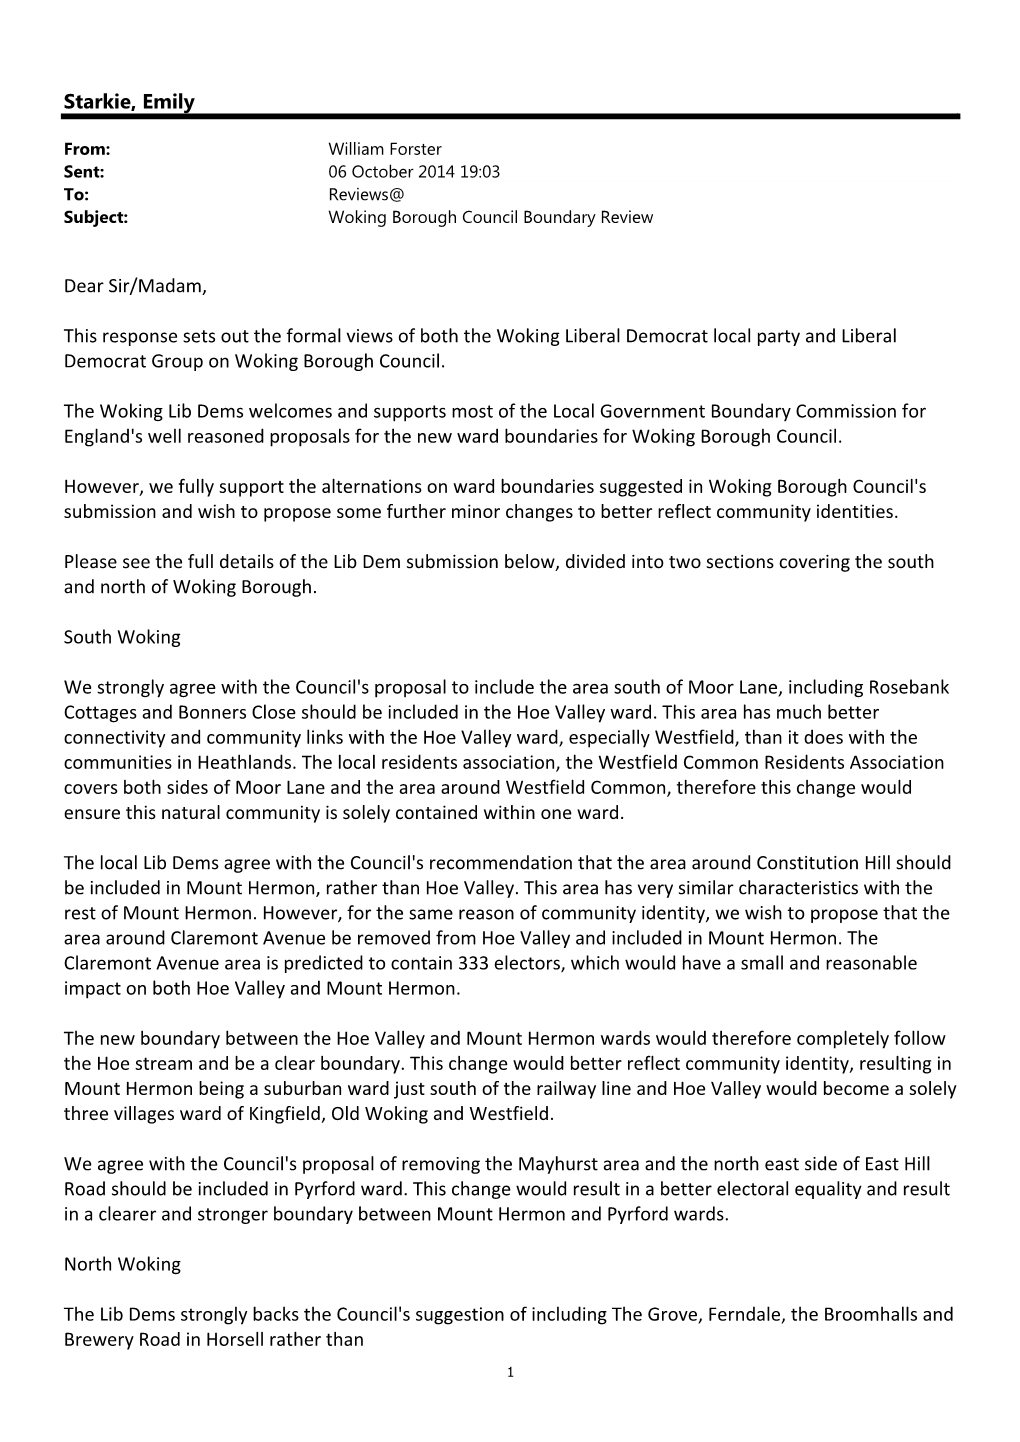 Starkie, Emily Dear Sir/Madam, This Response Sets out the Formal Views of Both the Woking Liberal Democrat Local